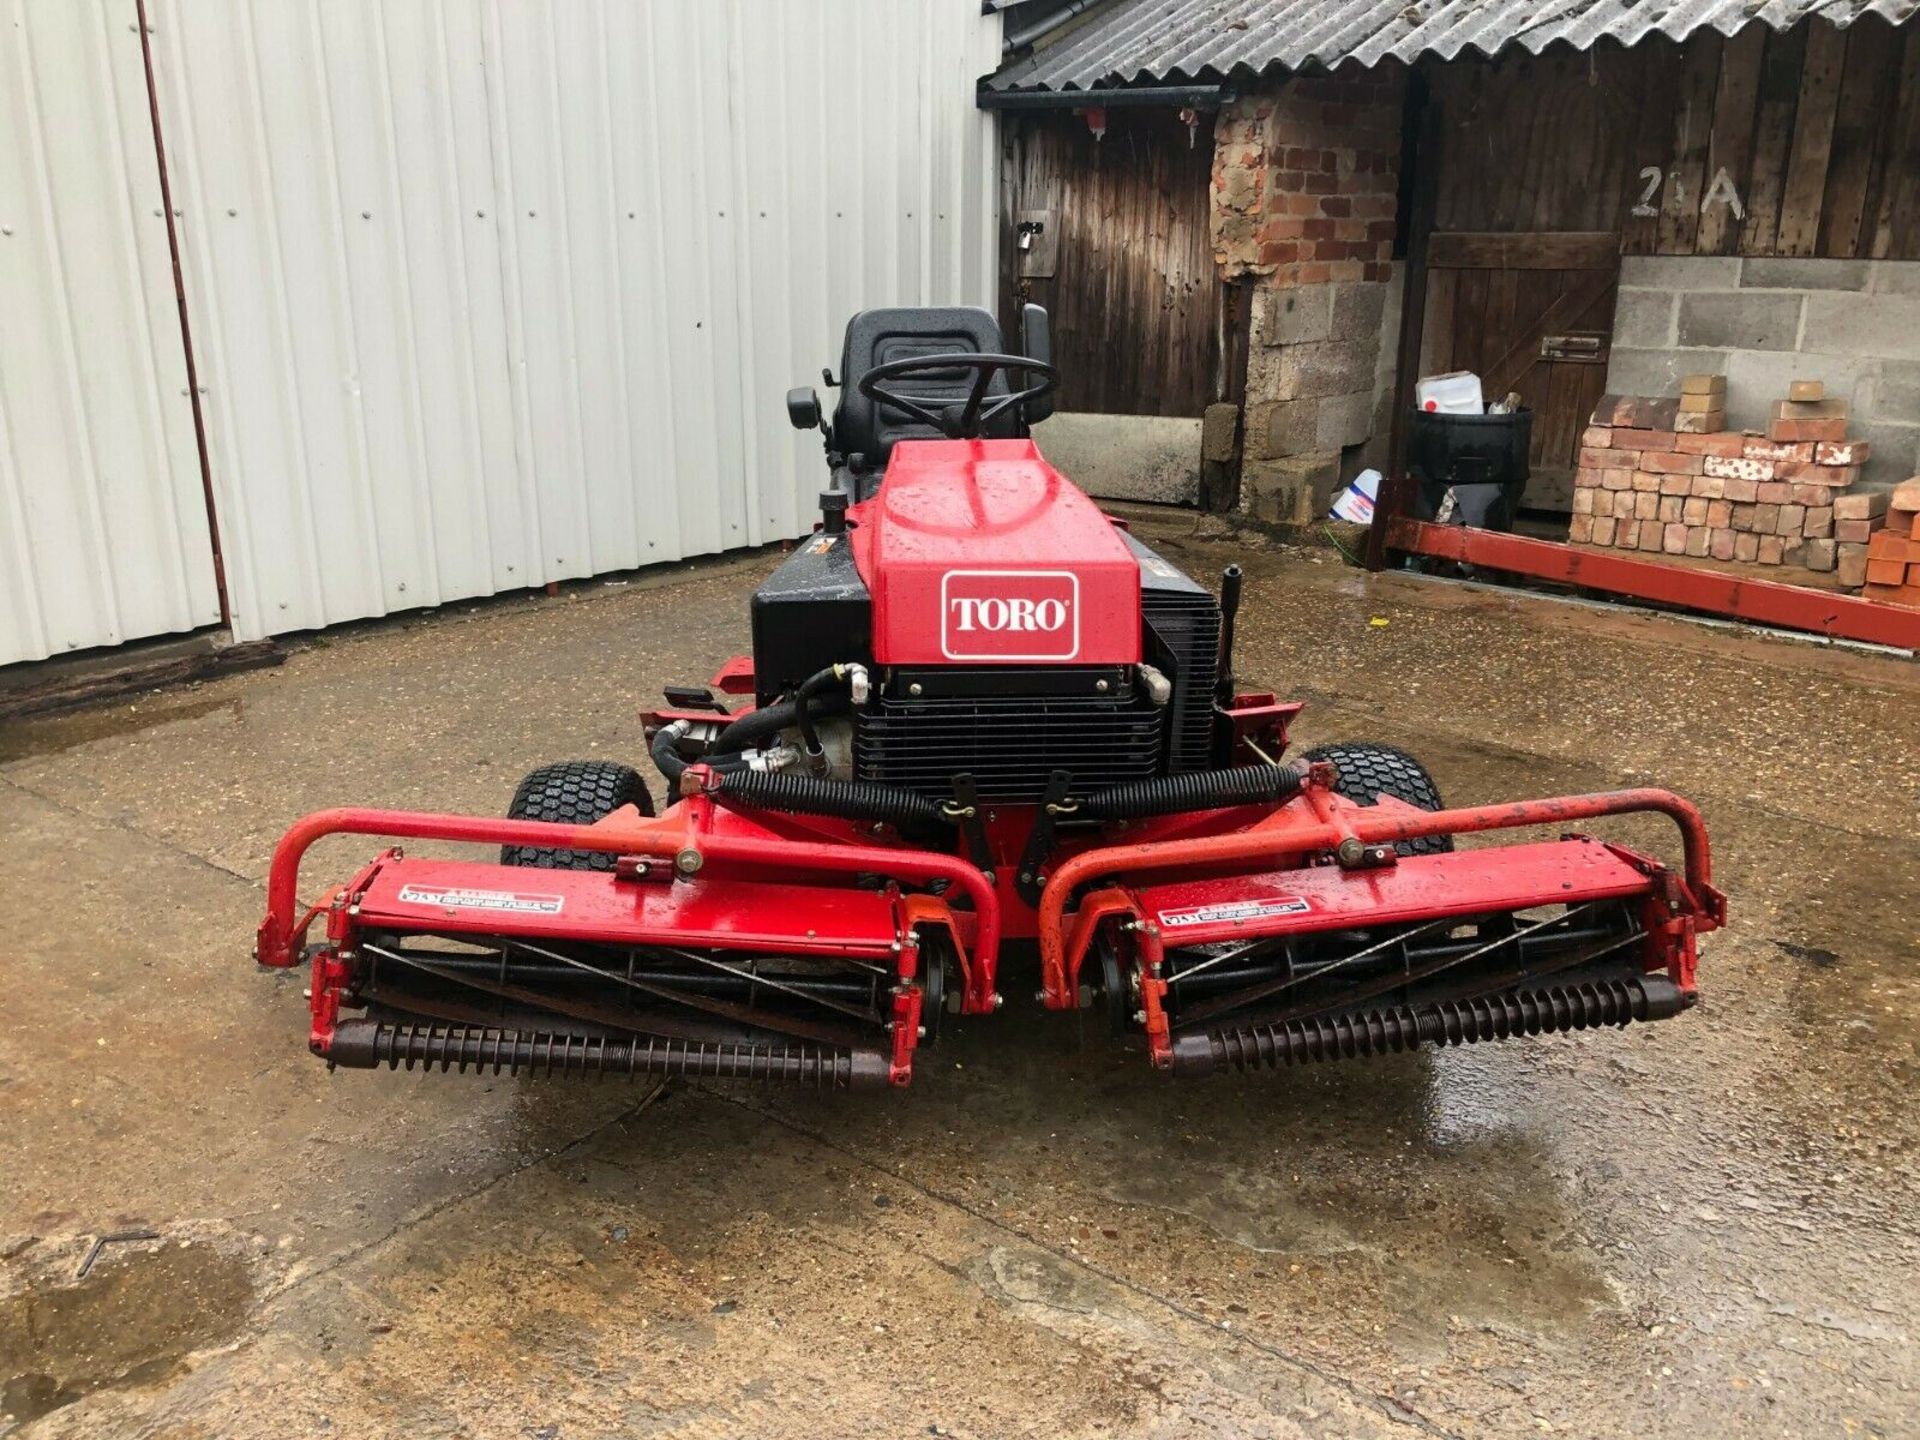 TORO 216 PETROL, TRIPLE RIDE ON MOWER, GENUINE 687 HOURS, 1 OWNER FROM NEW *NO VAT* - Image 3 of 5